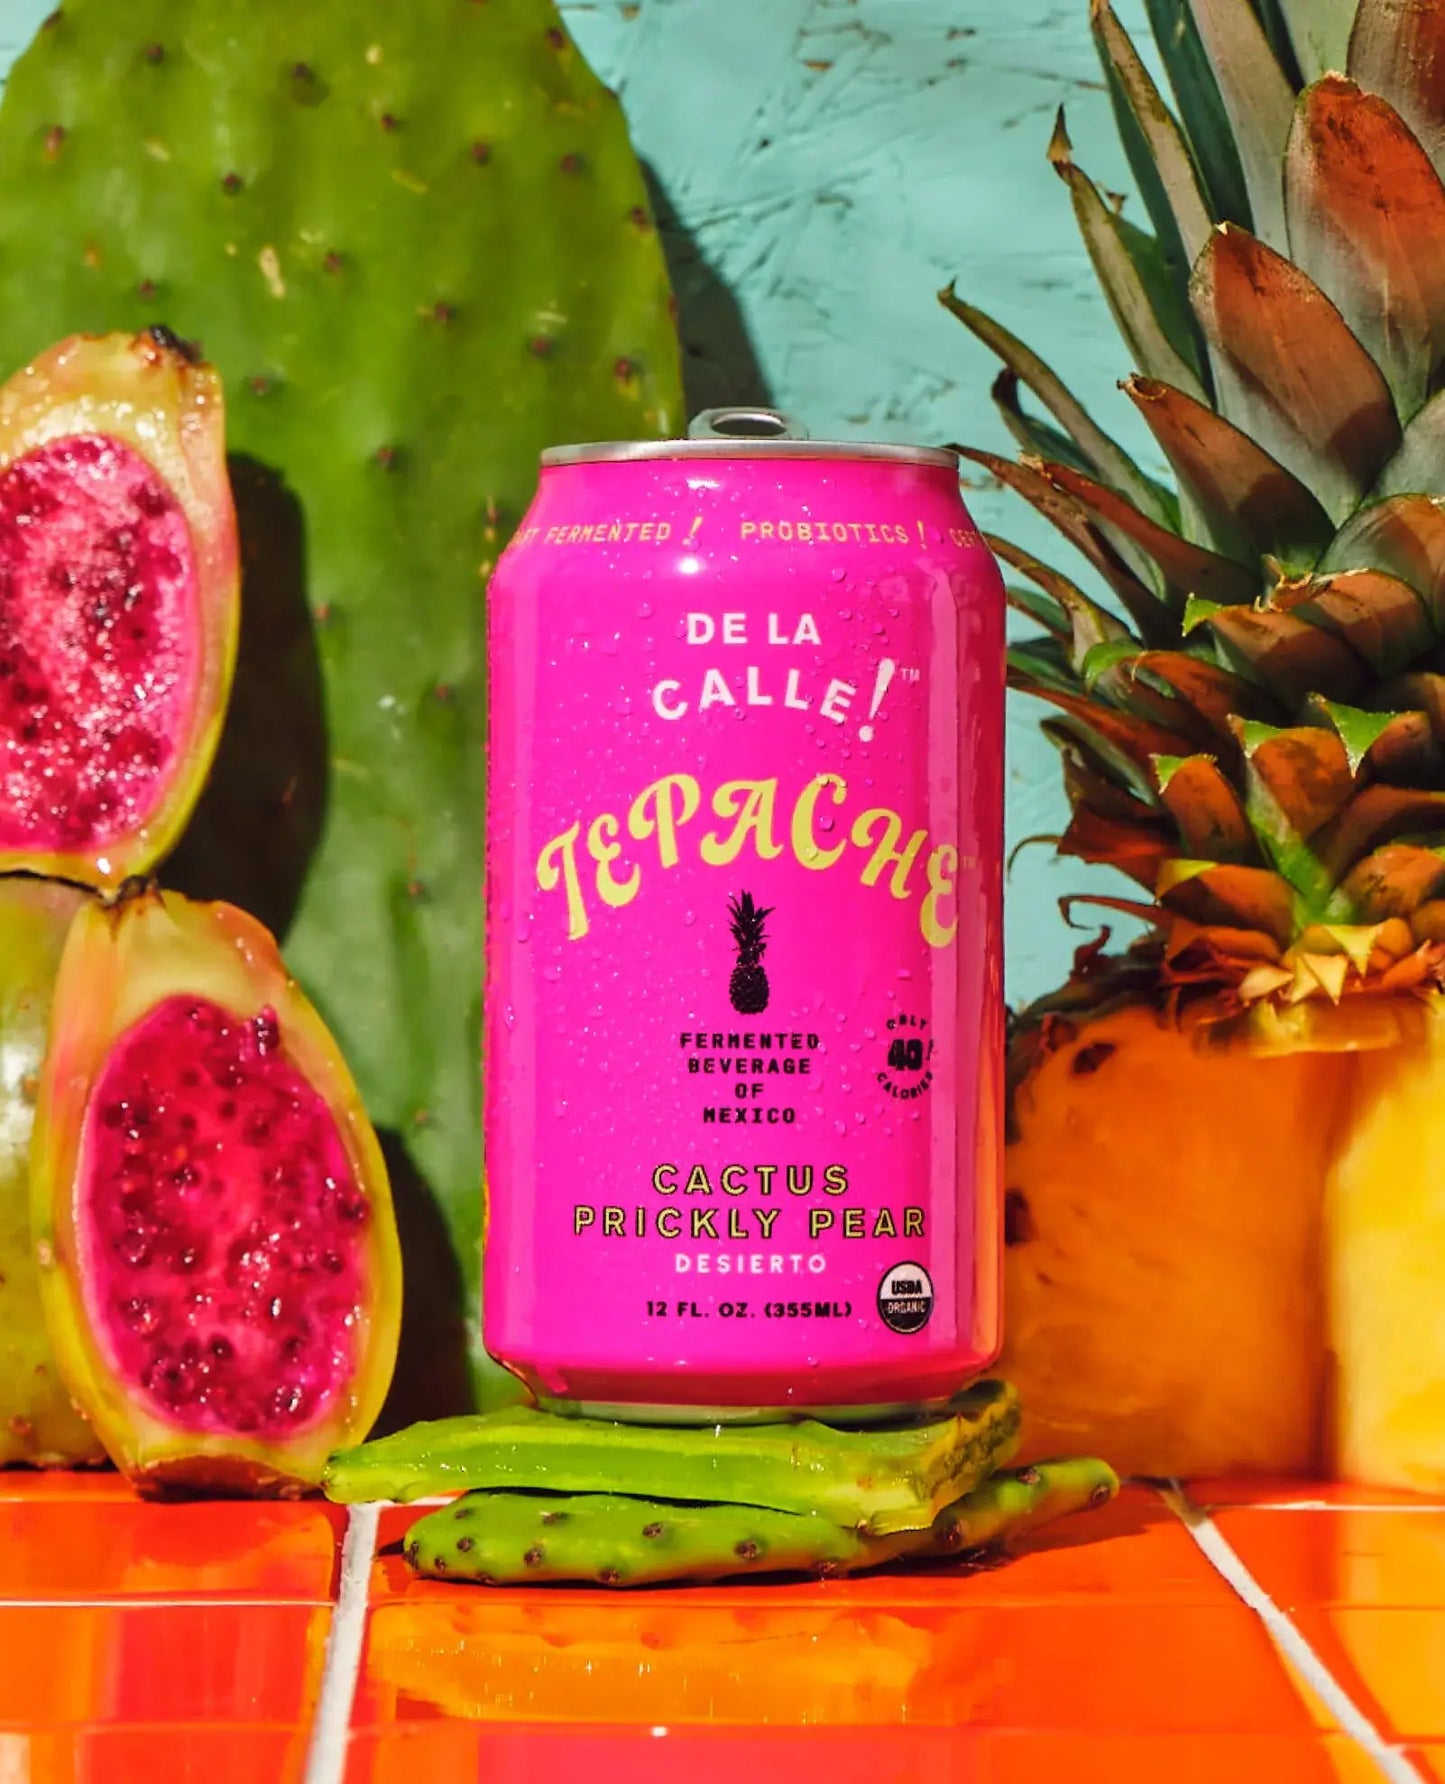 Cactus Prickly Pear Tepache Fermented Beverage